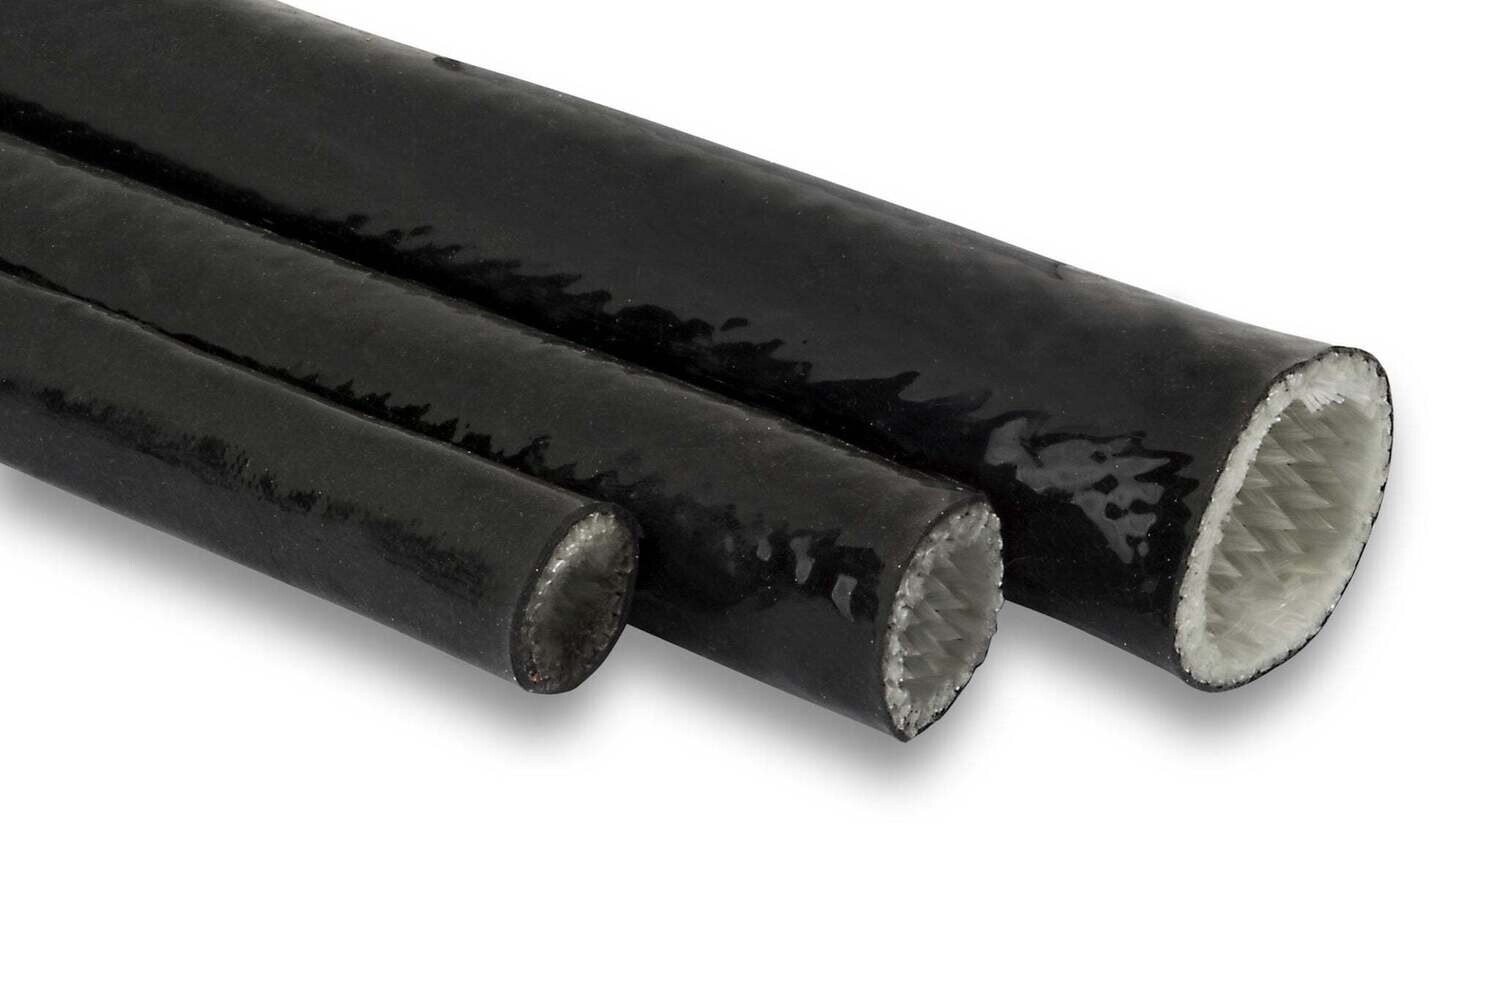 Black Silicon High Heat Sleeve - AN12 (Utilises 20mm Sleeving), 1.0m Multiple Qty will come on a continuous Roll